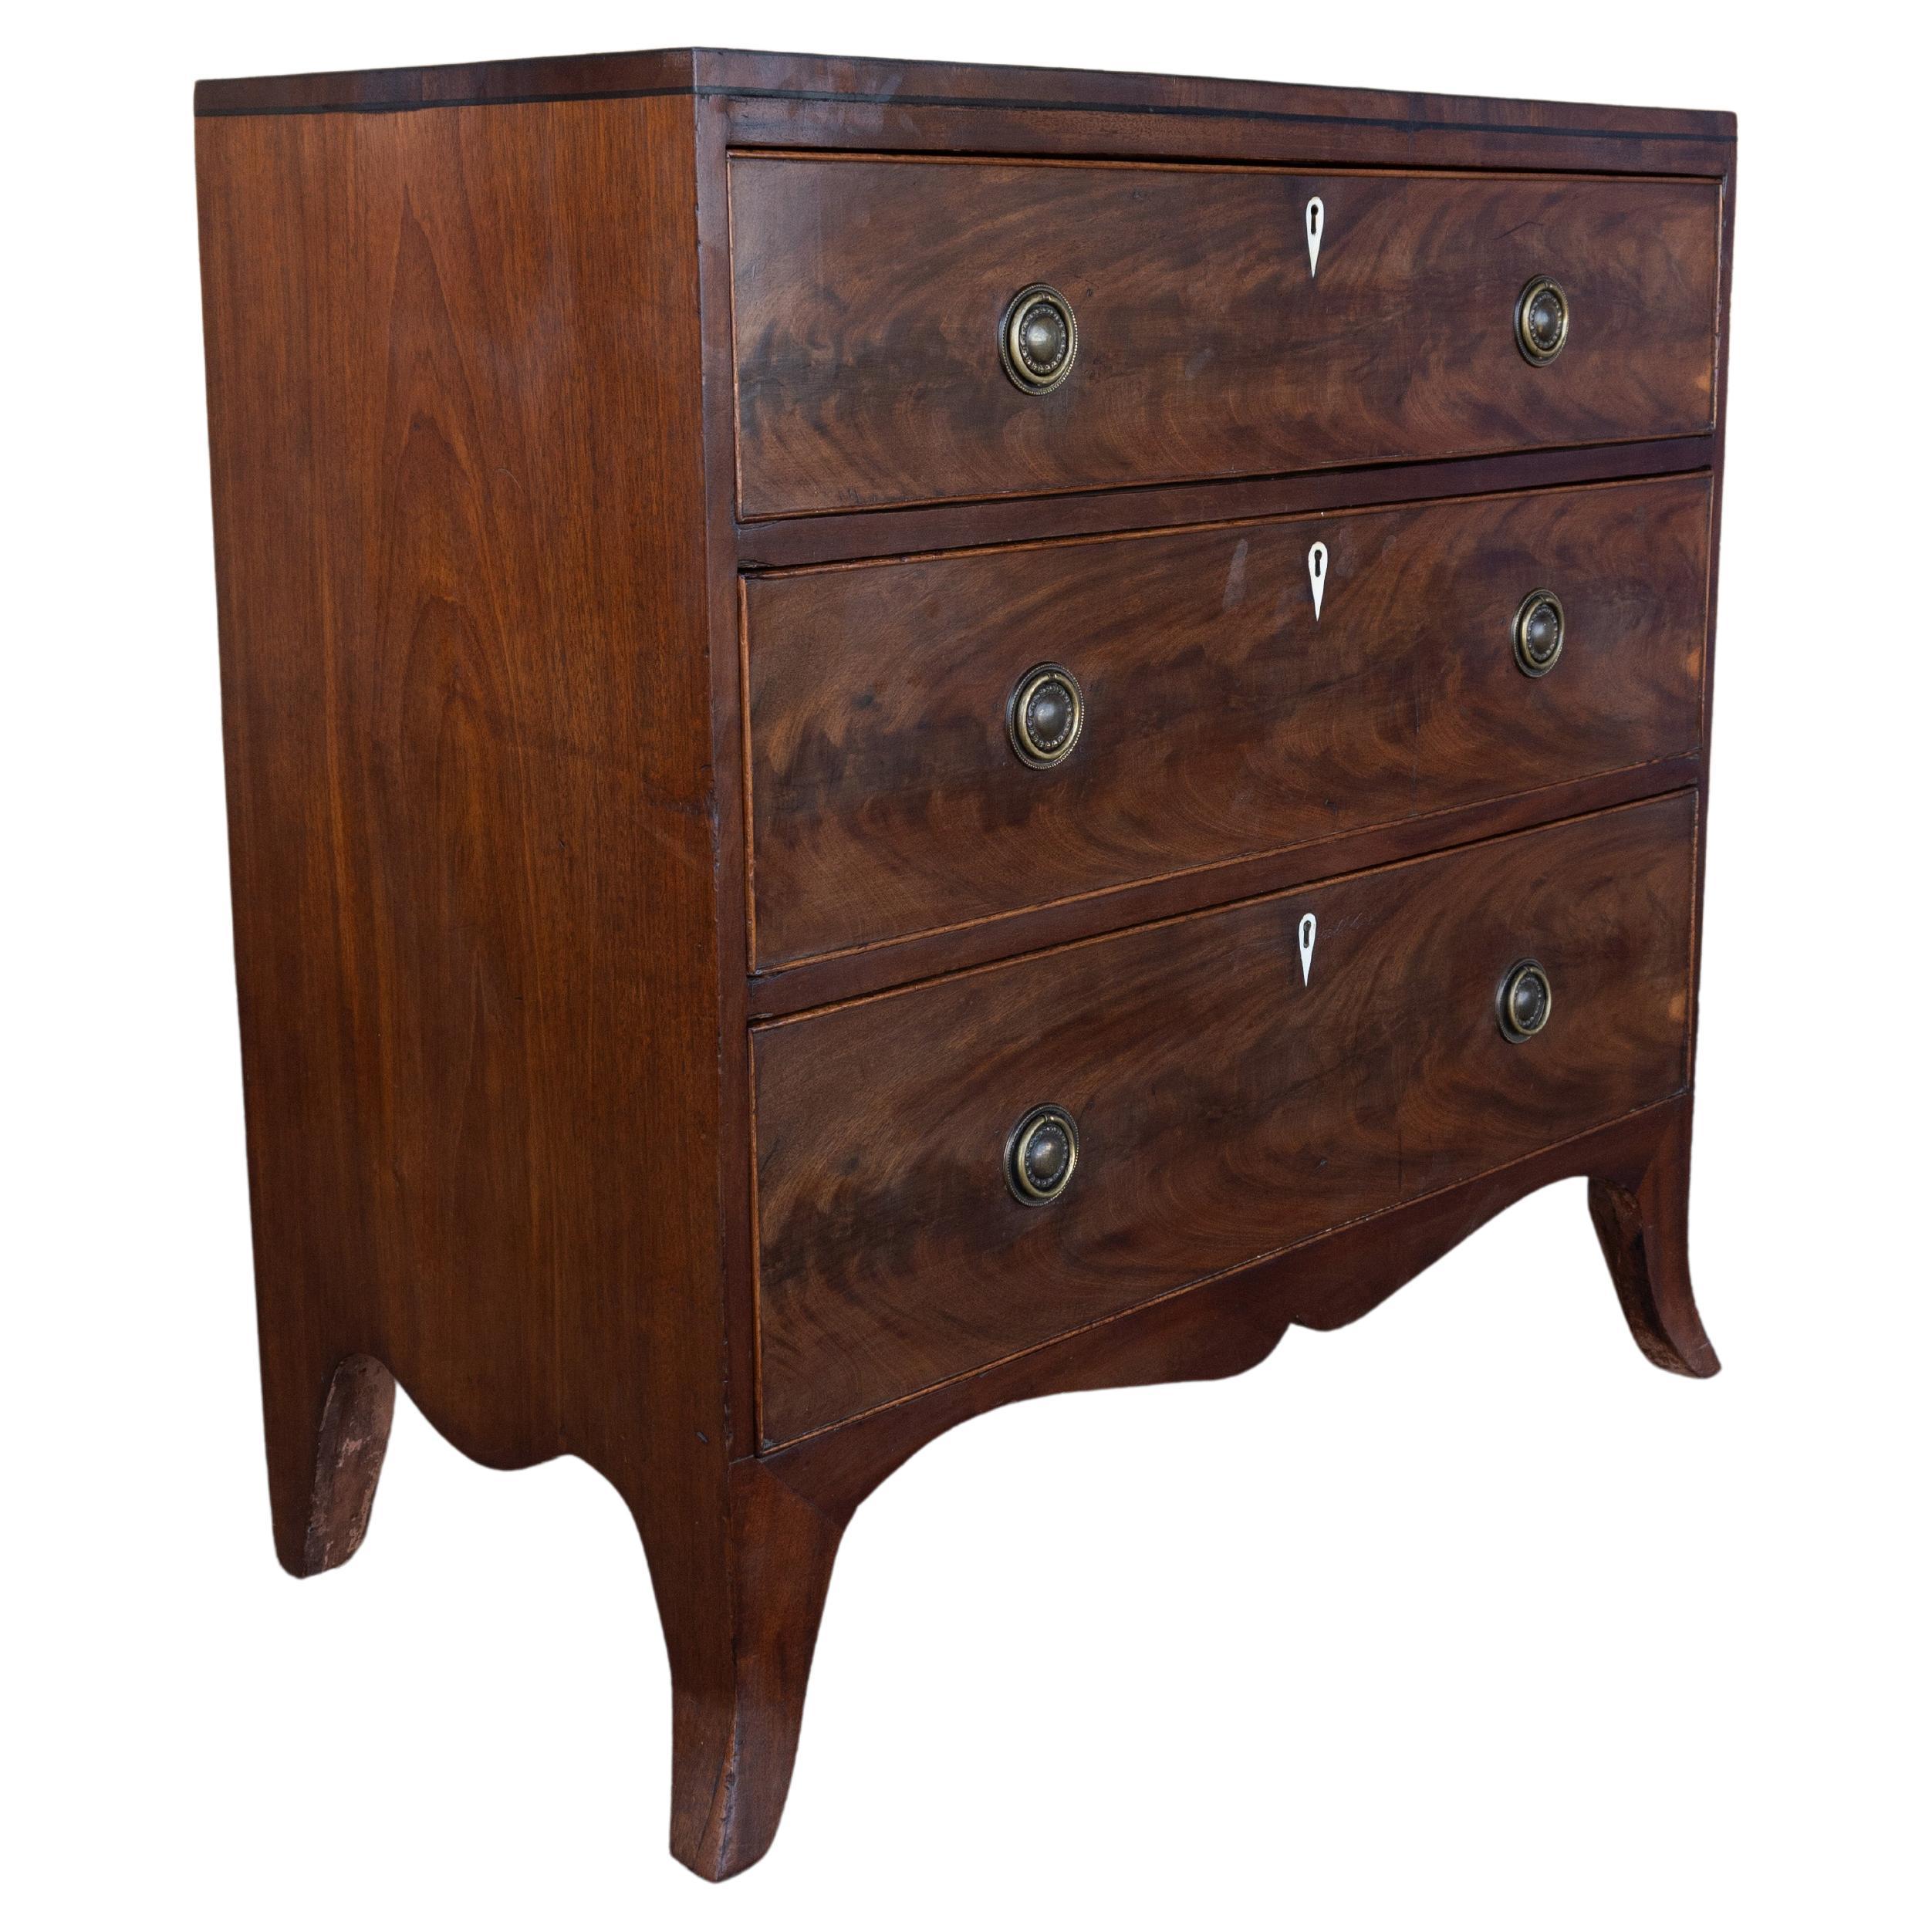 Antique English 19th Century Regency Diminutive Chest Of Drawers C.1810 For Sale 1